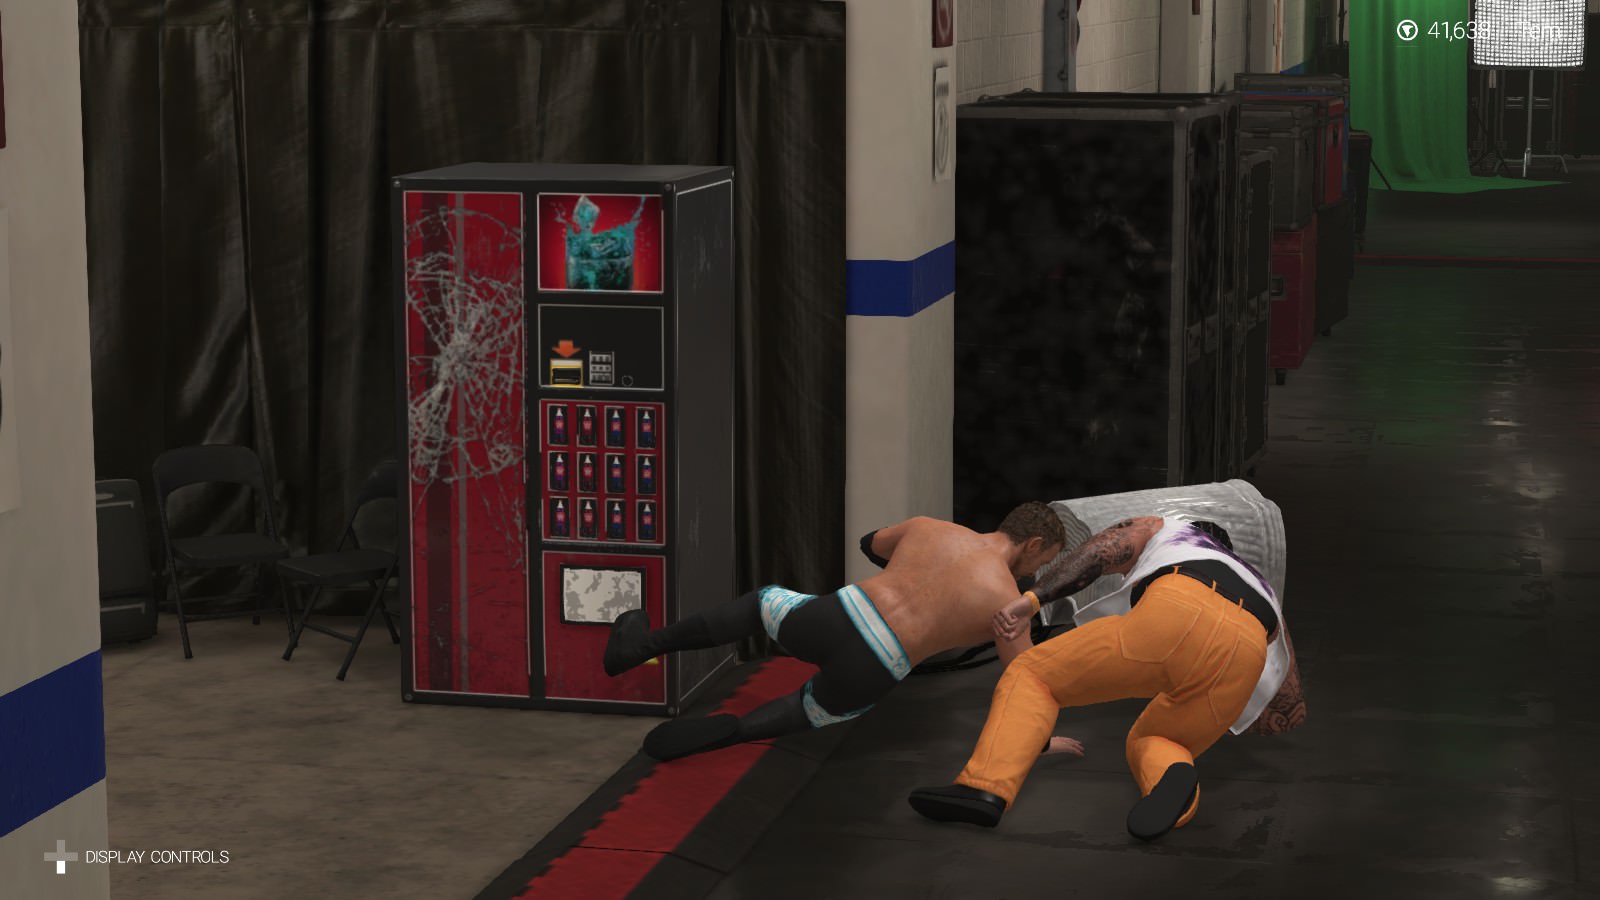 CALL OF NIGHTMARE - This Is WWE 2K18's Fault 